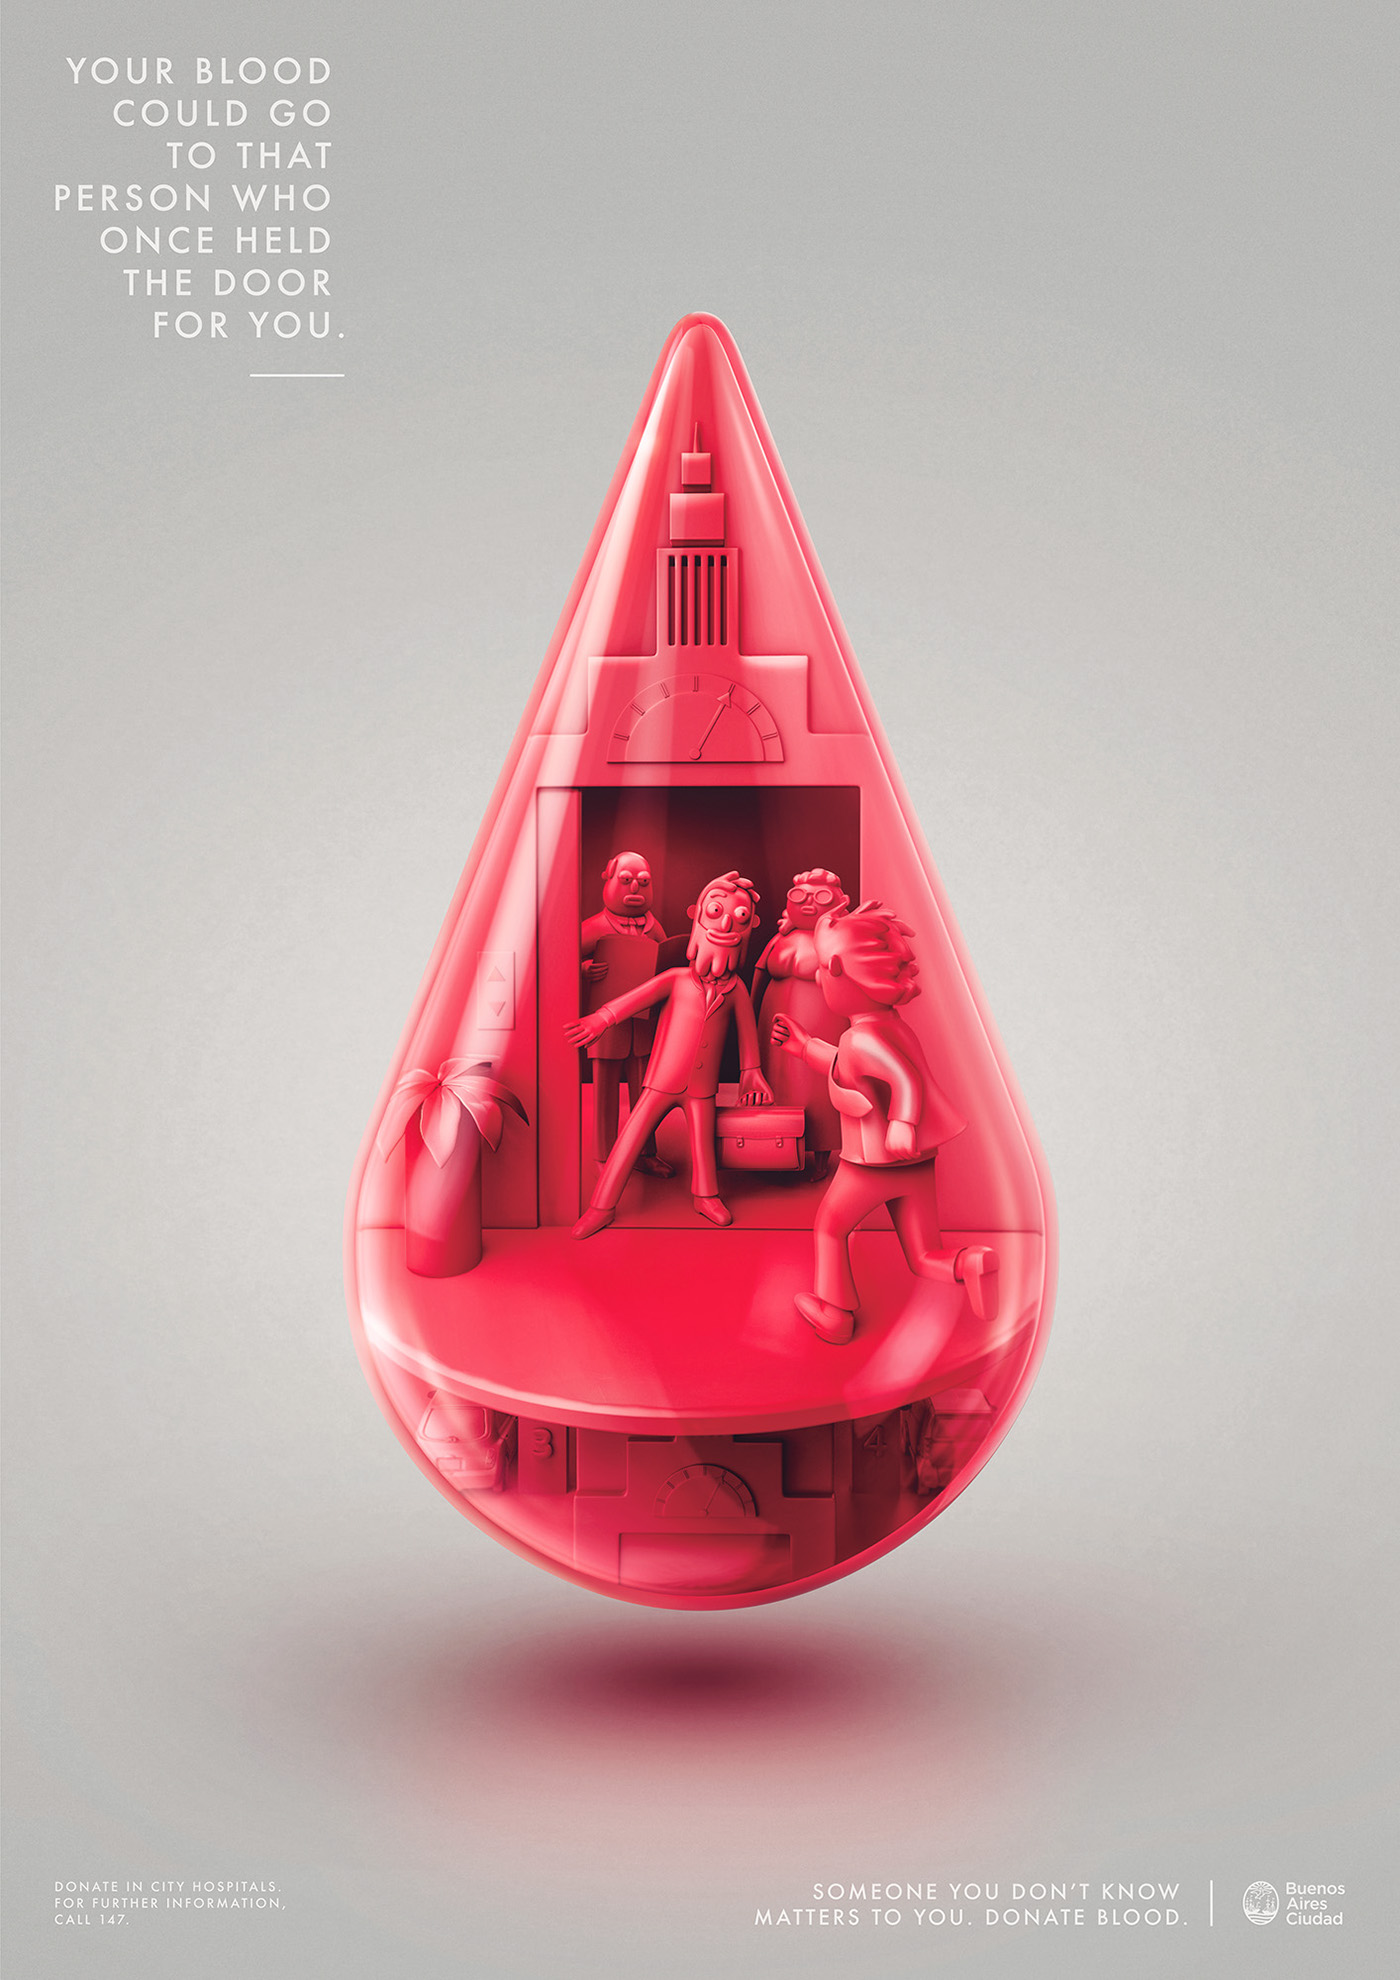 blood donation poster modeling 3D characters Advertising  campaign